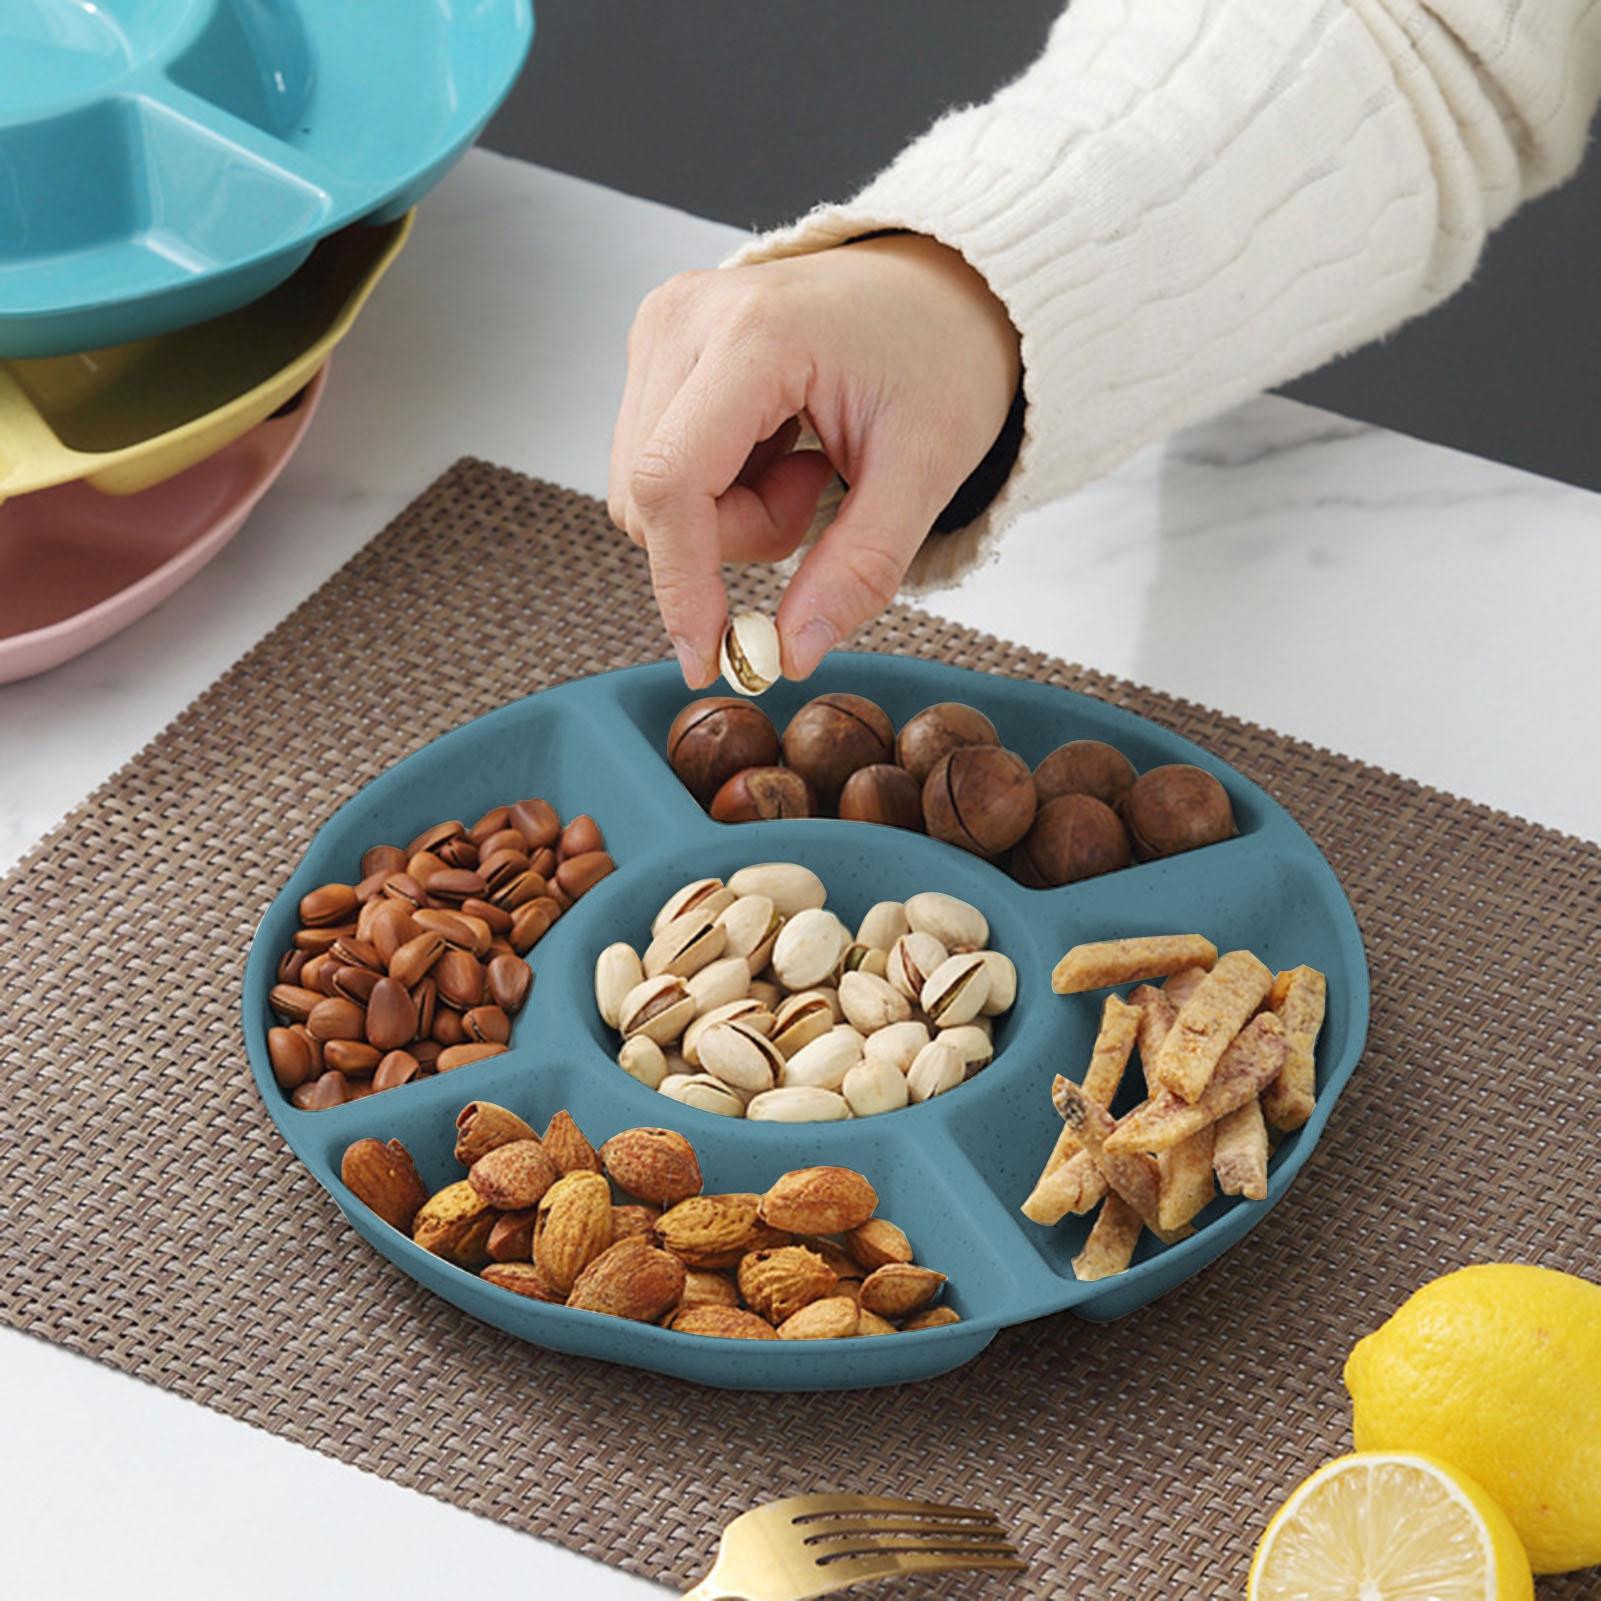 lsiaeian Sectional Platter Divided Serving Dishes Appetizer Serving Trays with 5 Compartments Platter Tray Veggie Tray Chip Dip Tray Divided Snack Trays for Fruit Nut Candy Party - image 3 of 7